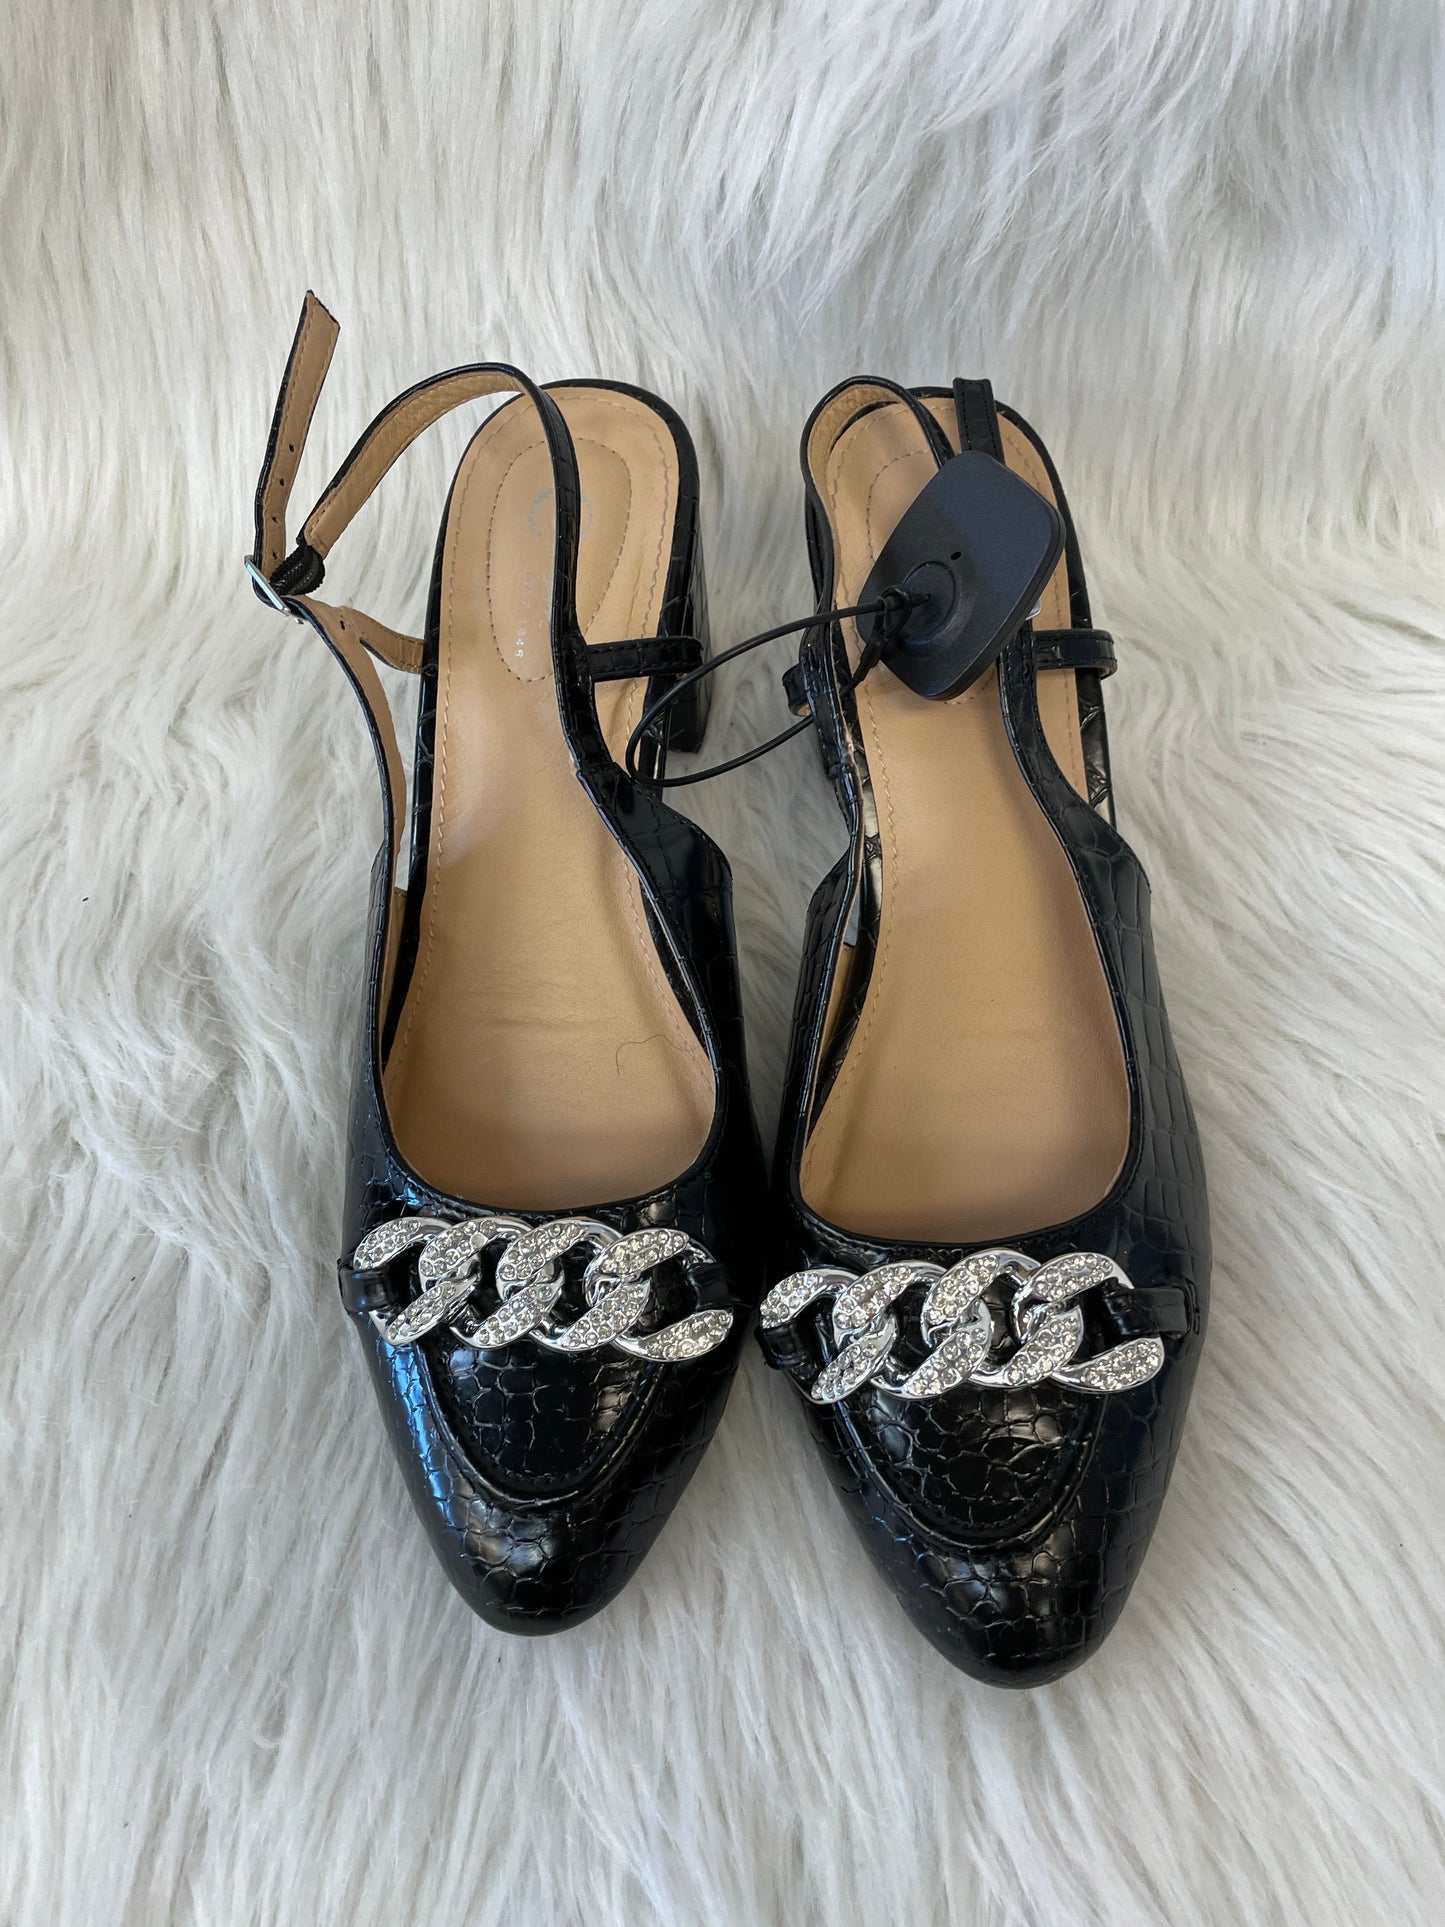 Black & Silver Shoes Heels Block Cato, Size 10